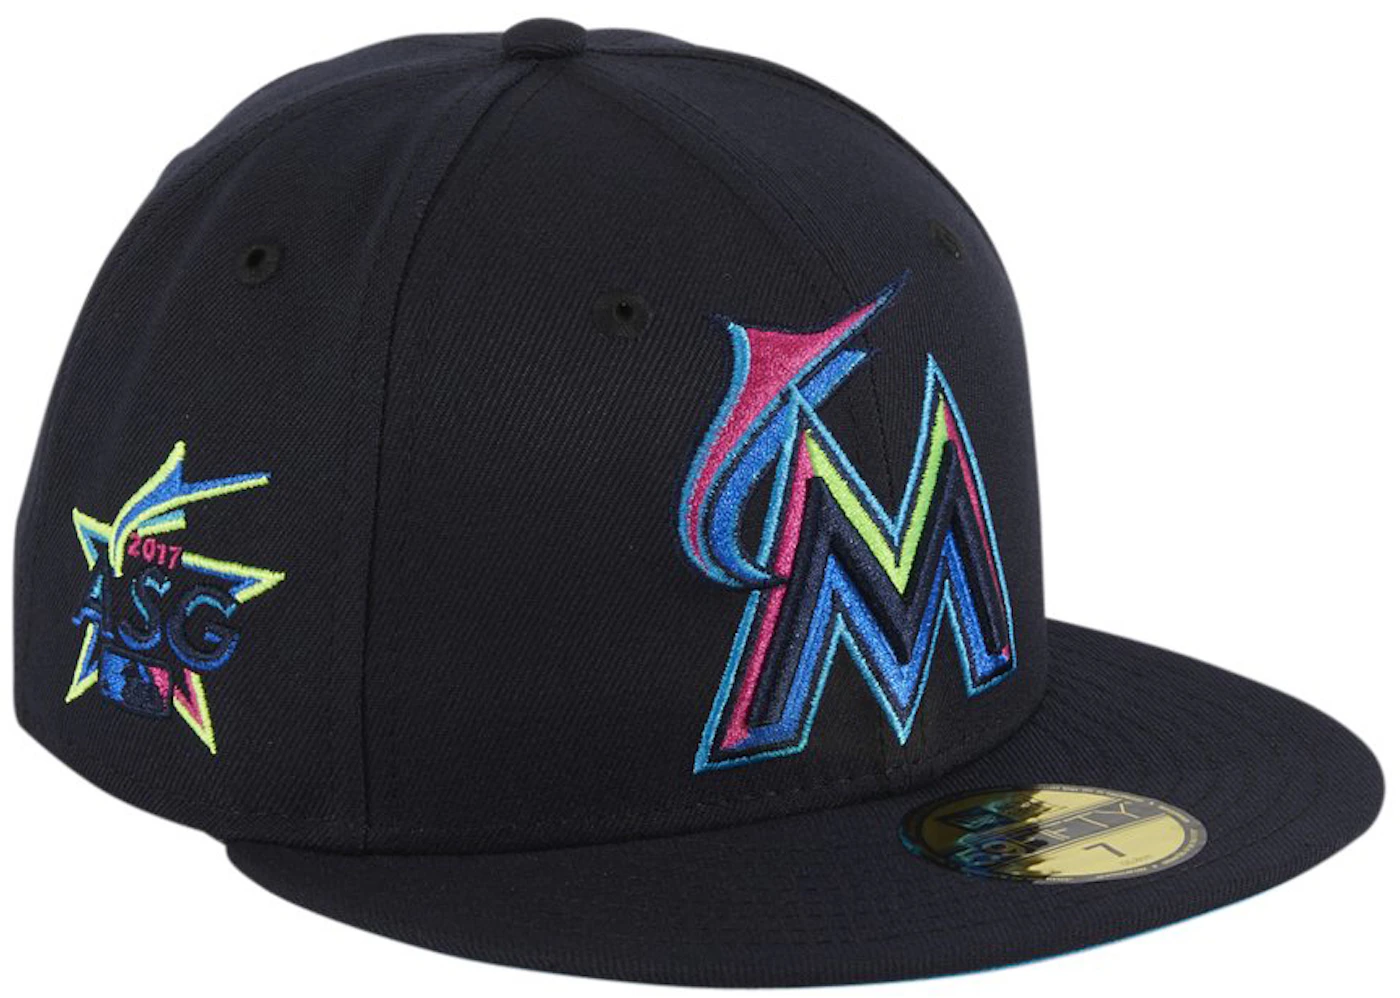 New Era Miami Marlins Retro City Two Tone Edition 59Fifty Fitted Hat, FITTED HATS, CAPS